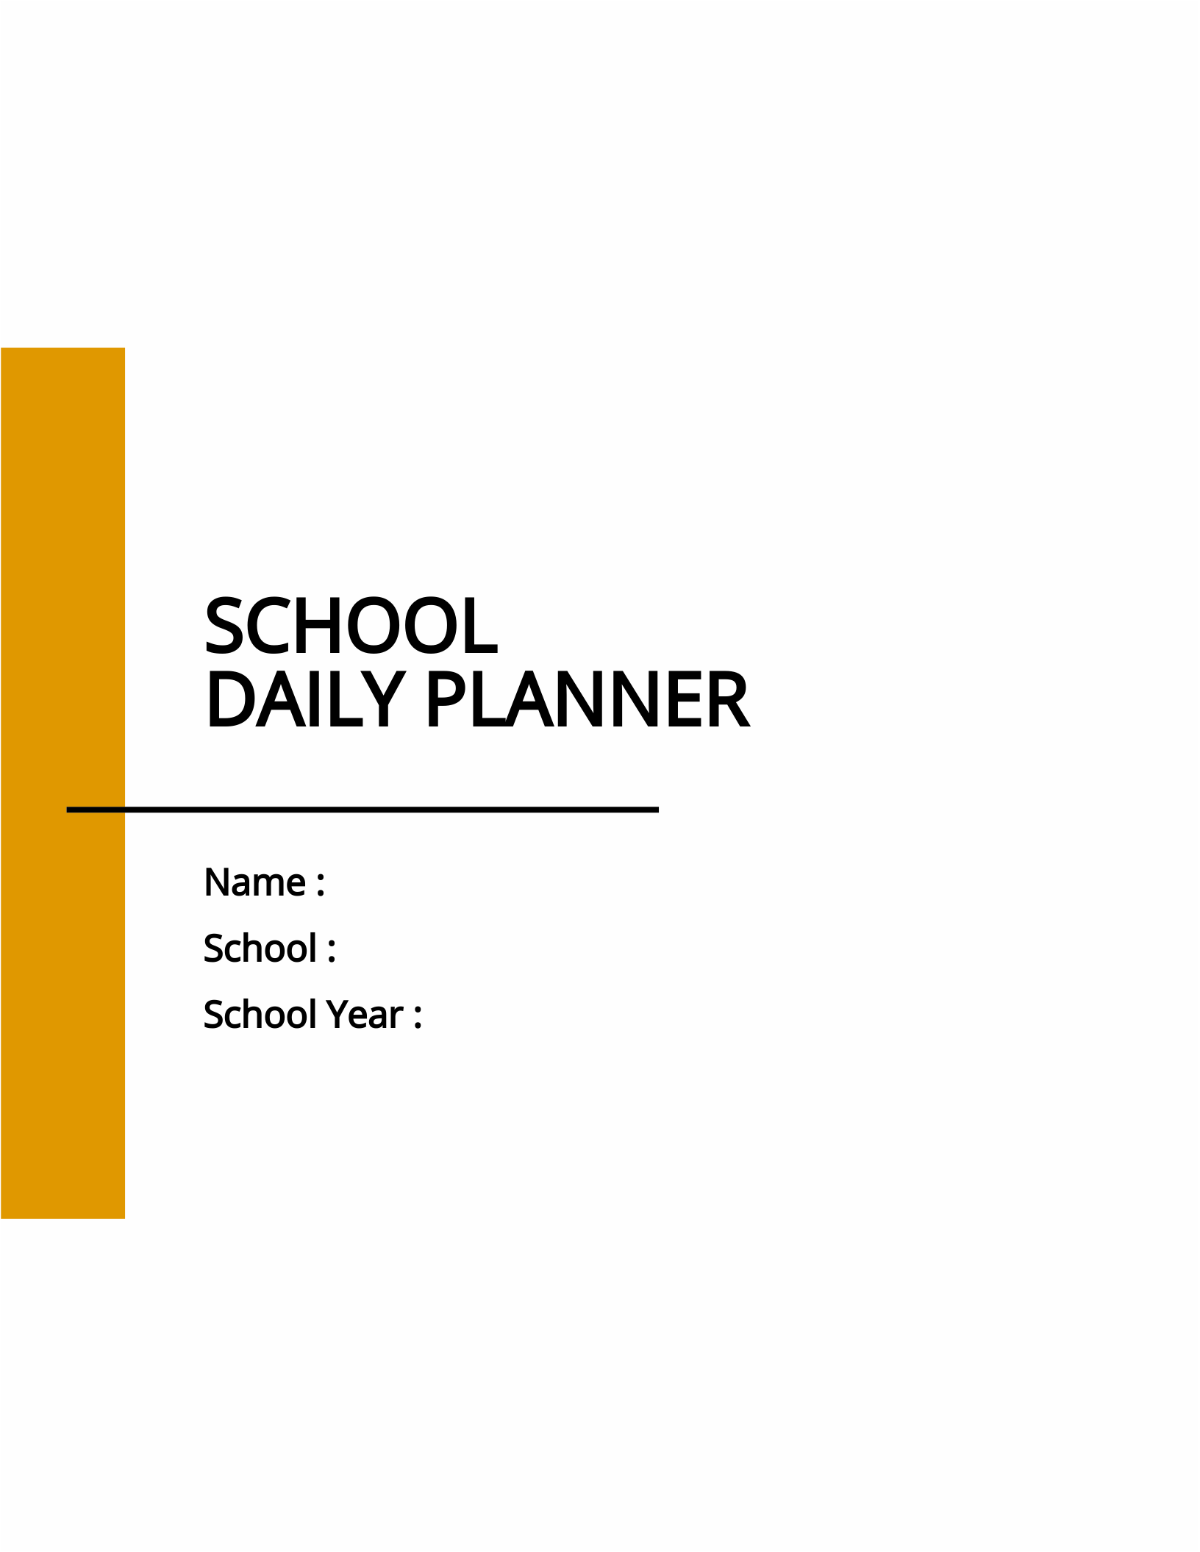 School Daily Planner Template